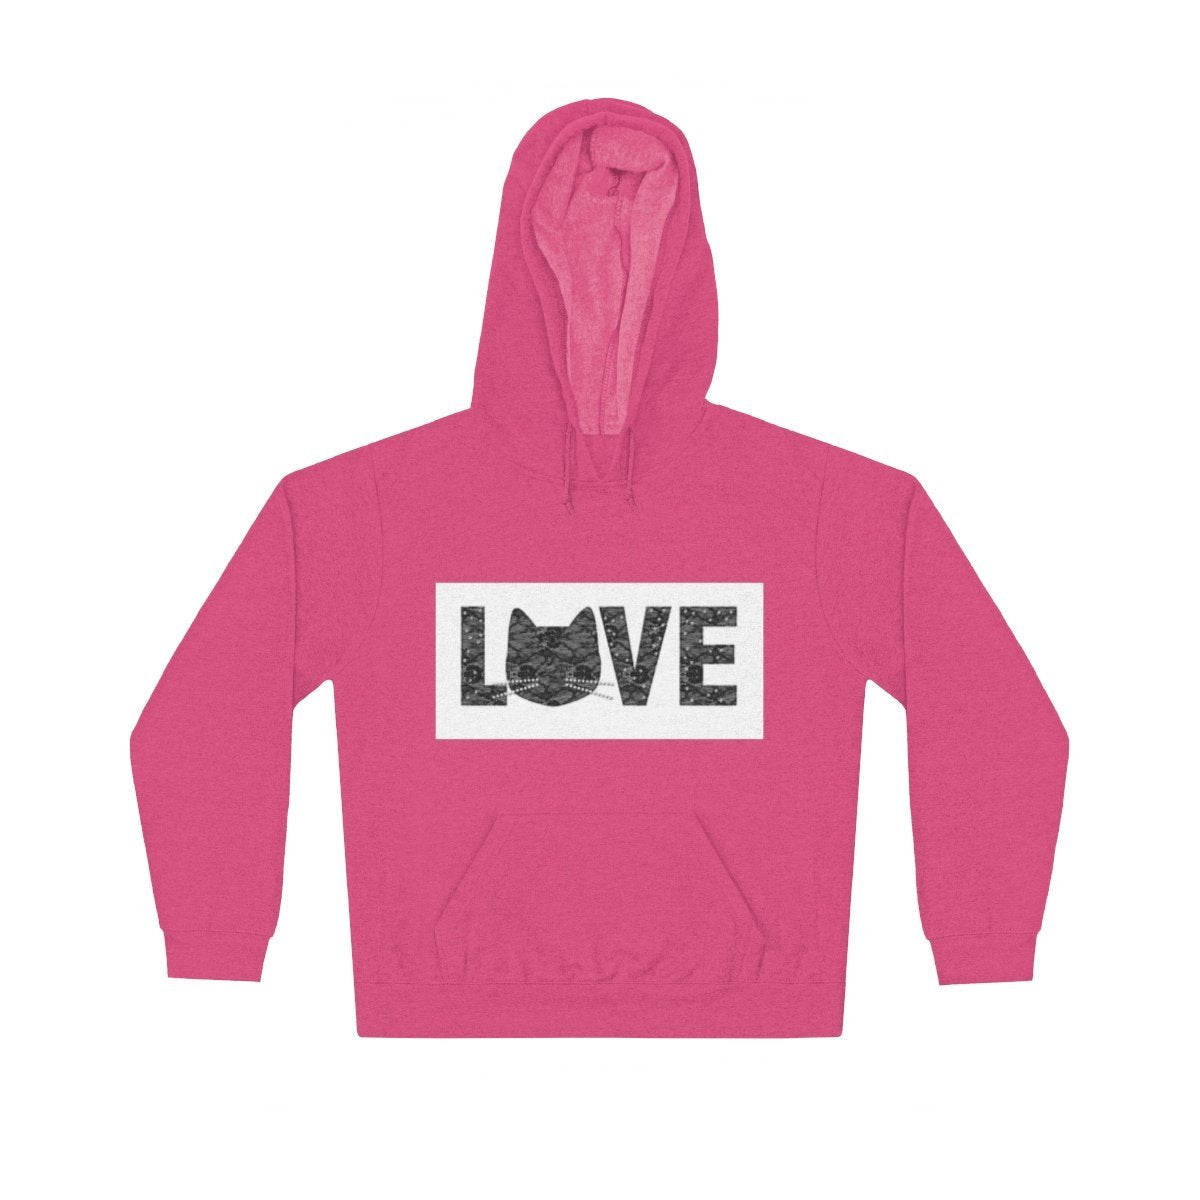 Womens clothing with cats on them, pink cat sweatshirt with the text "Love" and a cat face in lace print